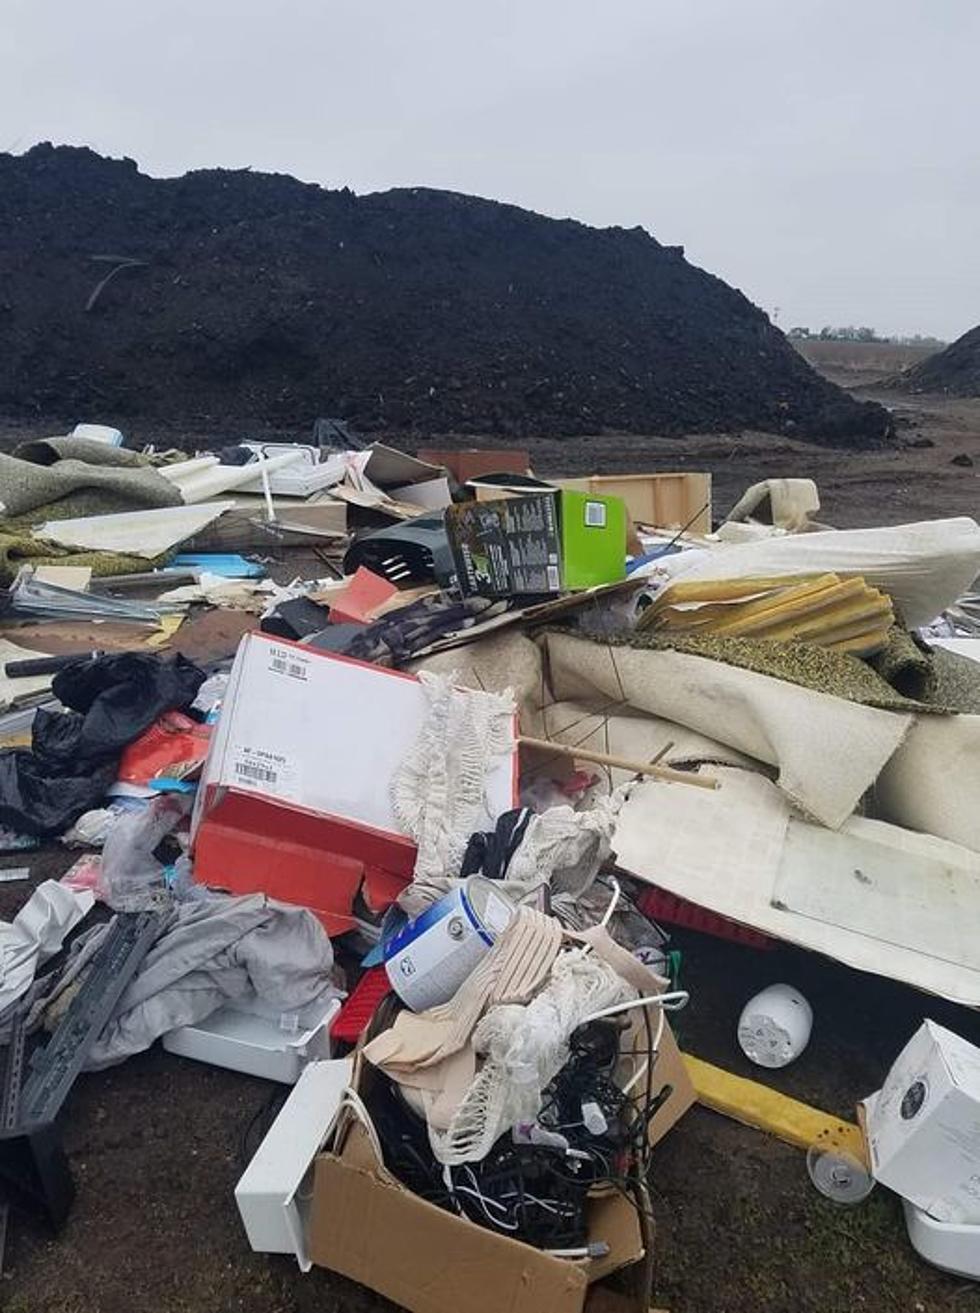 Foley’s Compost Site Left Trashed, Authorities Looking for Info